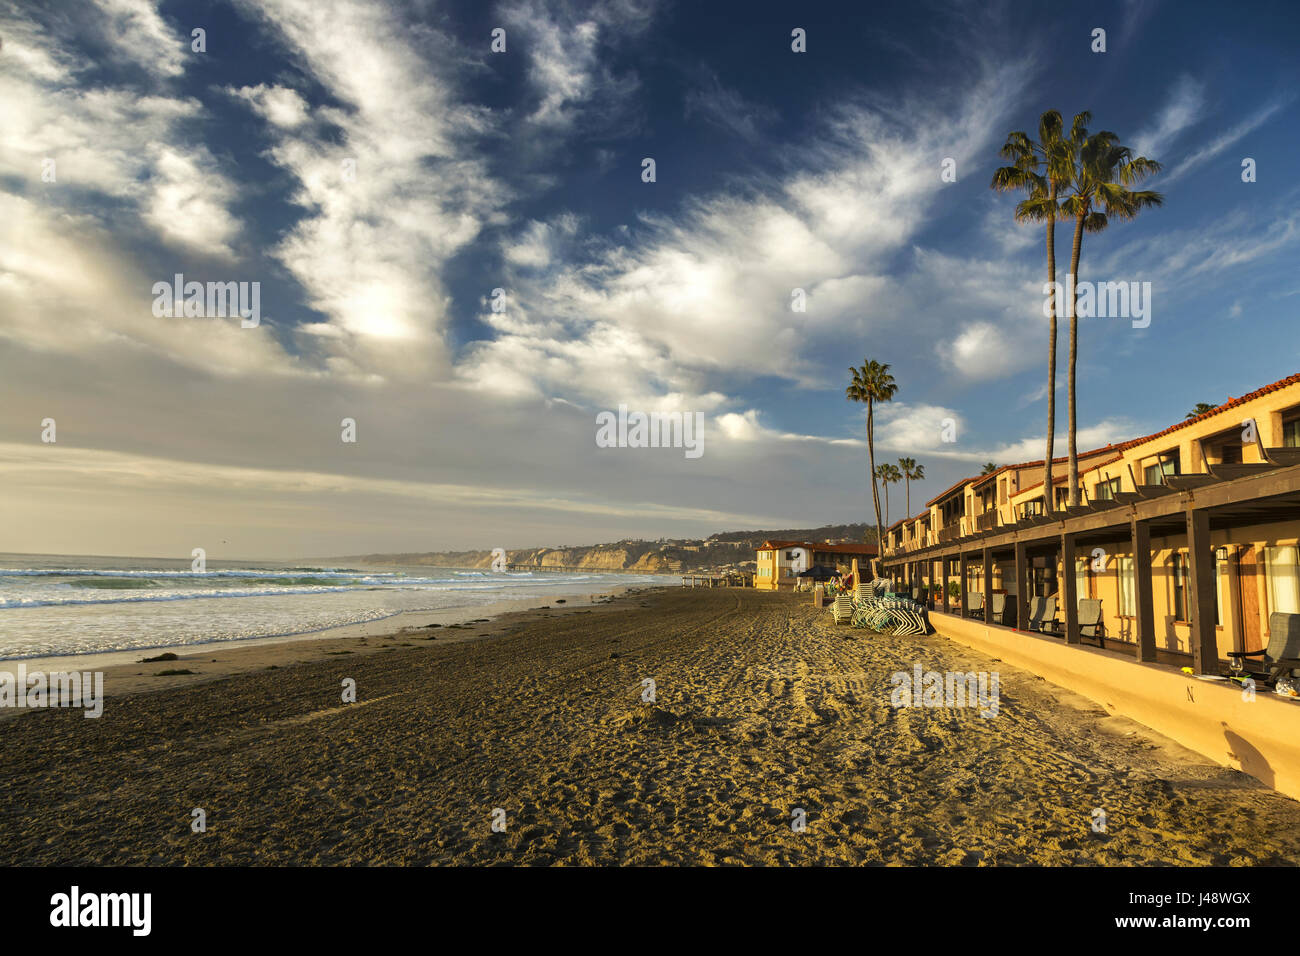 La Jolla Shores Beach Waterfront Hotel, Palm Trees and Pacific Ocean California Coast. Dramatic Sky Clouds Distant Torrey Pines State Reserve Horizon Stock Photo